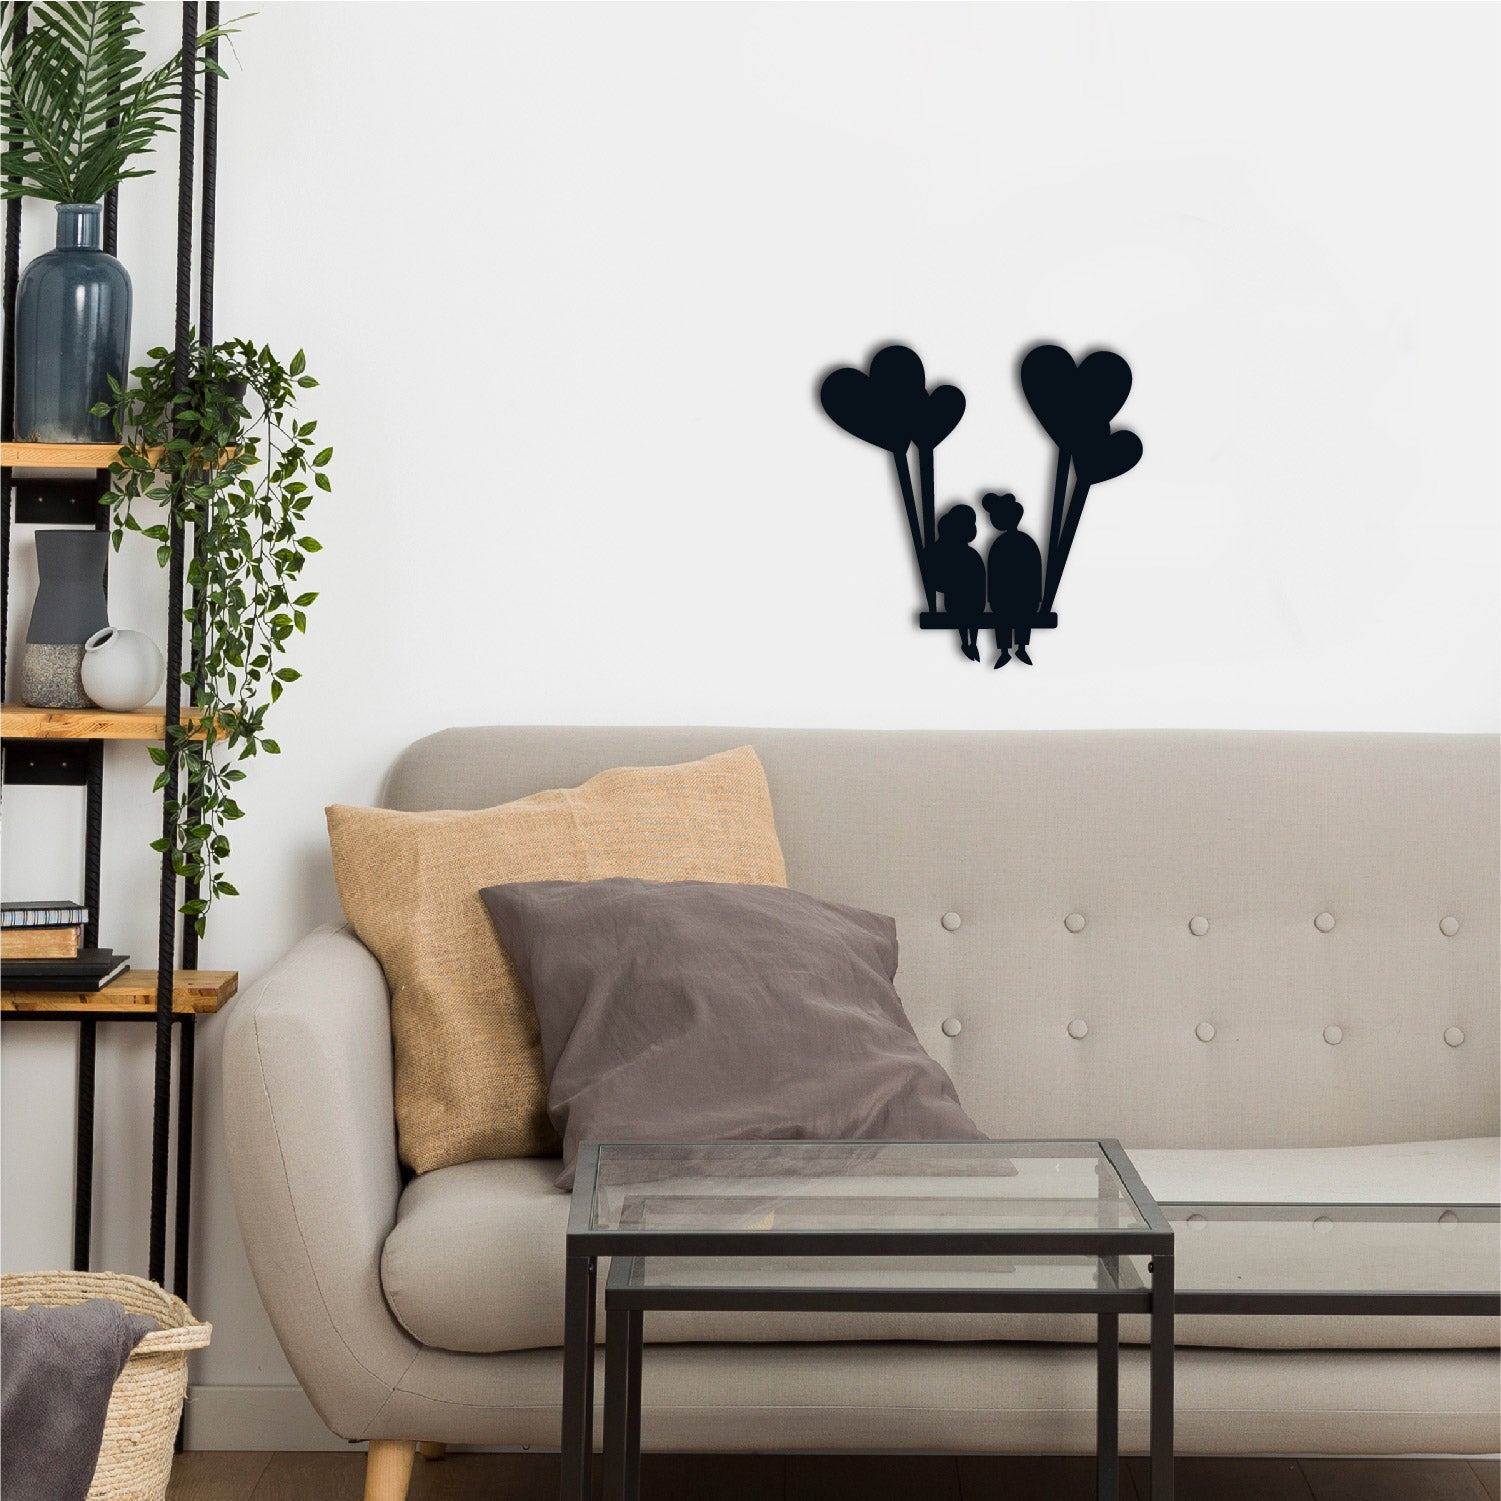 Young Loving Couple with Hearts Balloons Black Engineered Wood Wall Art Cutout, Ready to Hang Home Decor 1